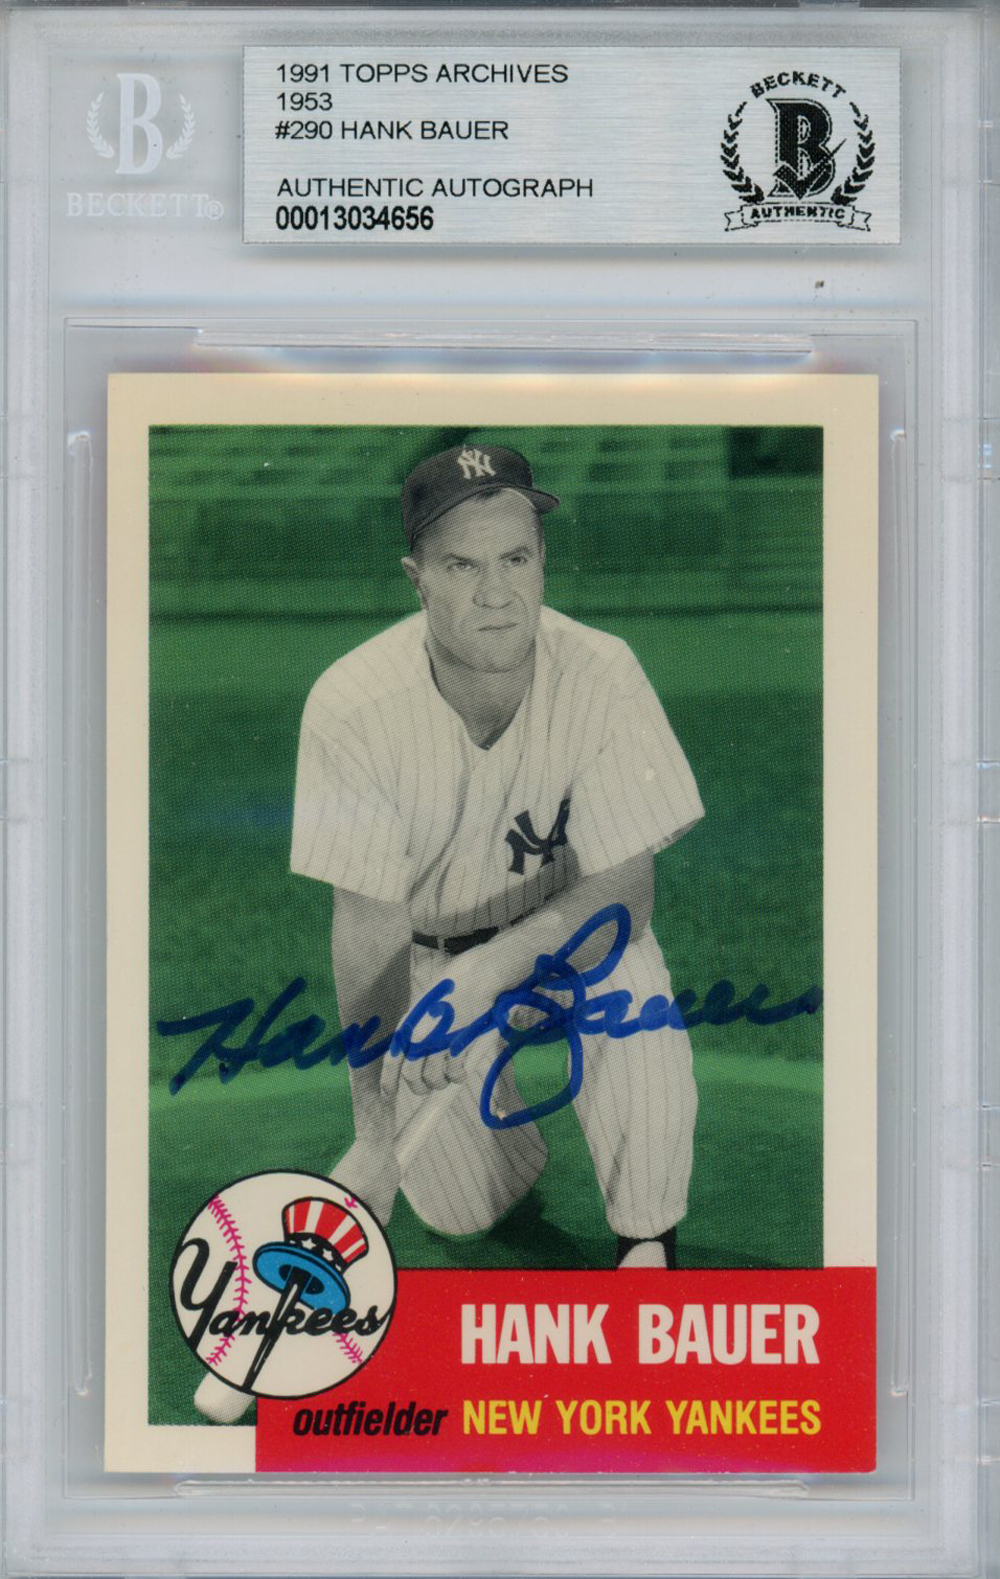 Hank Bauer Autographed 1991 Topps Archives 1953 #290 Card Beckett Slab